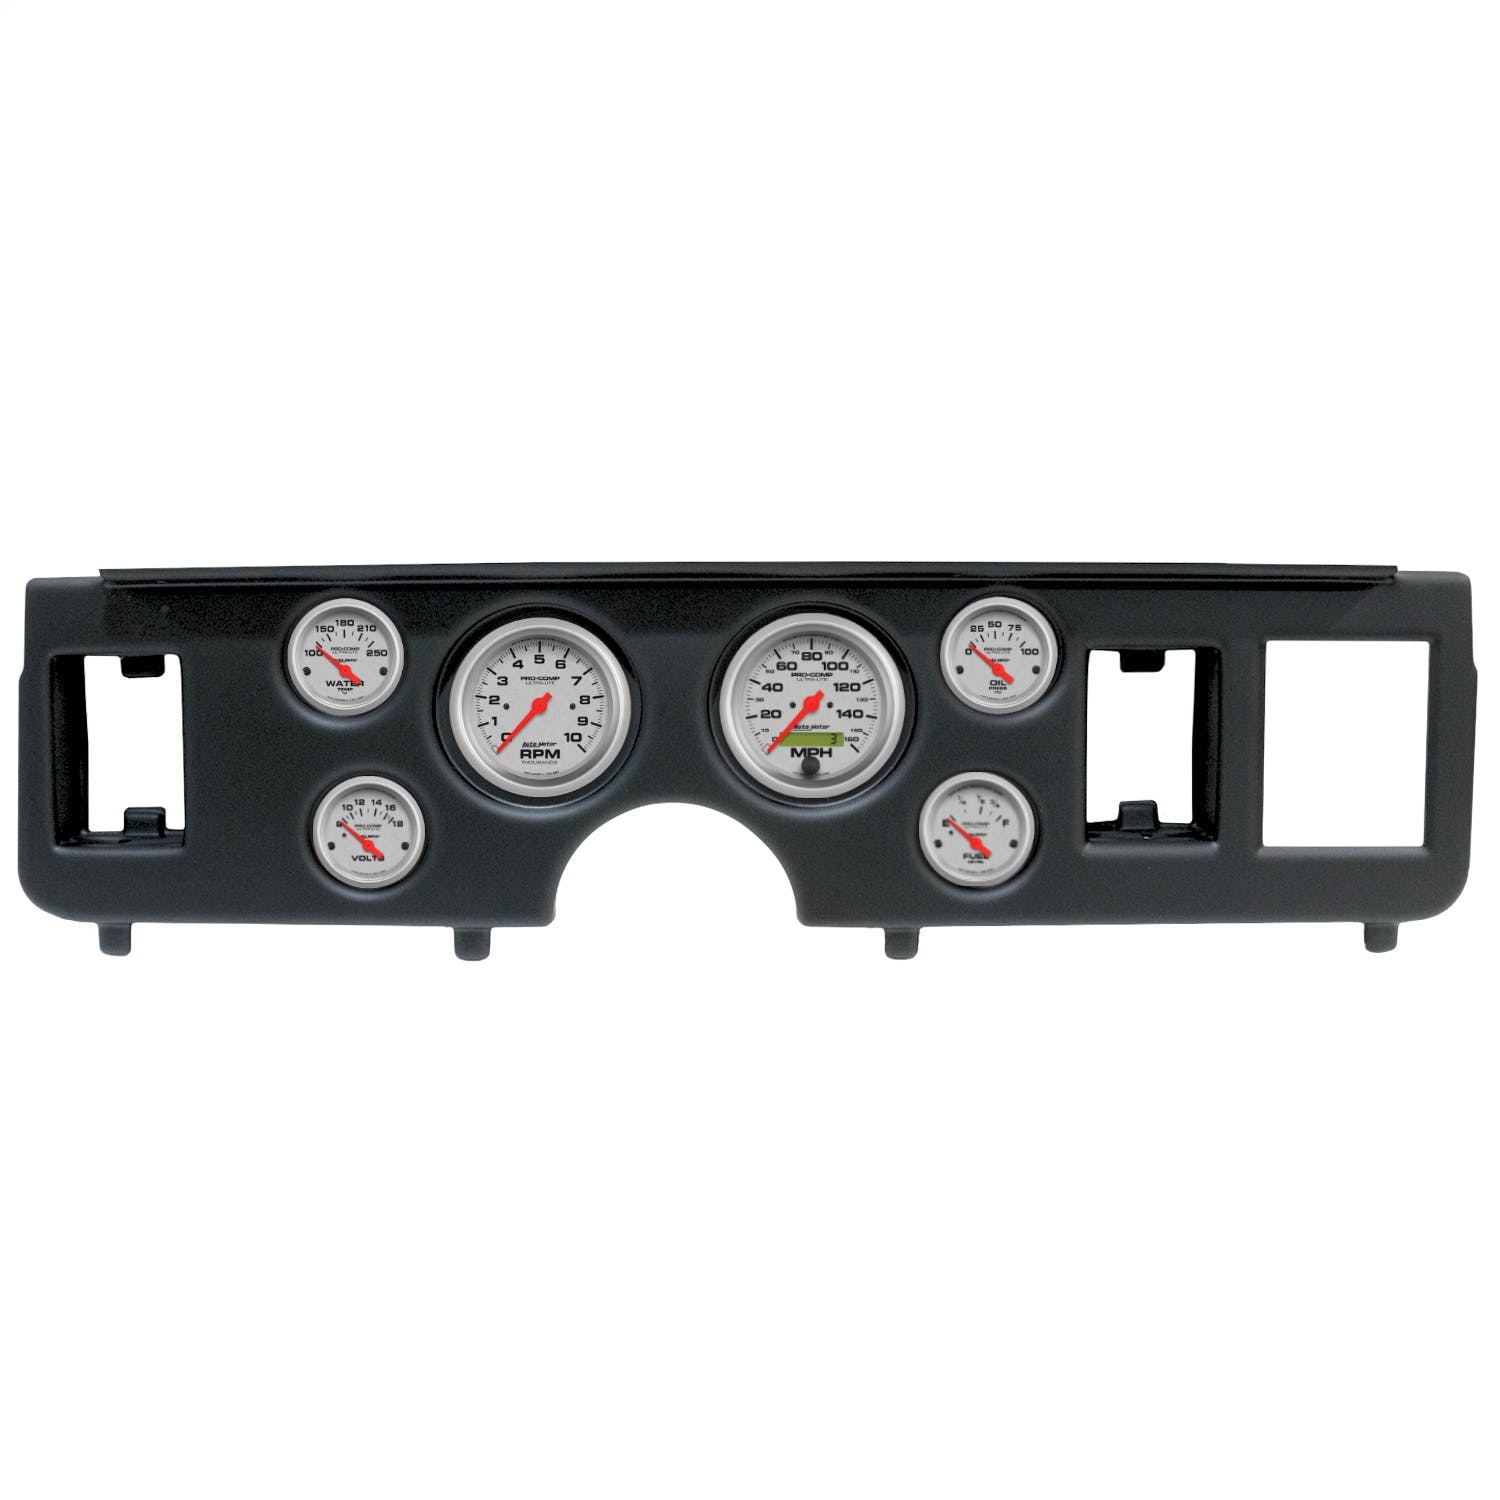 AutoMeter Products 2917-13 6 Gauge Direct-Fit Dash Kit, Ford Mustang 79-86, Ultra-Lite